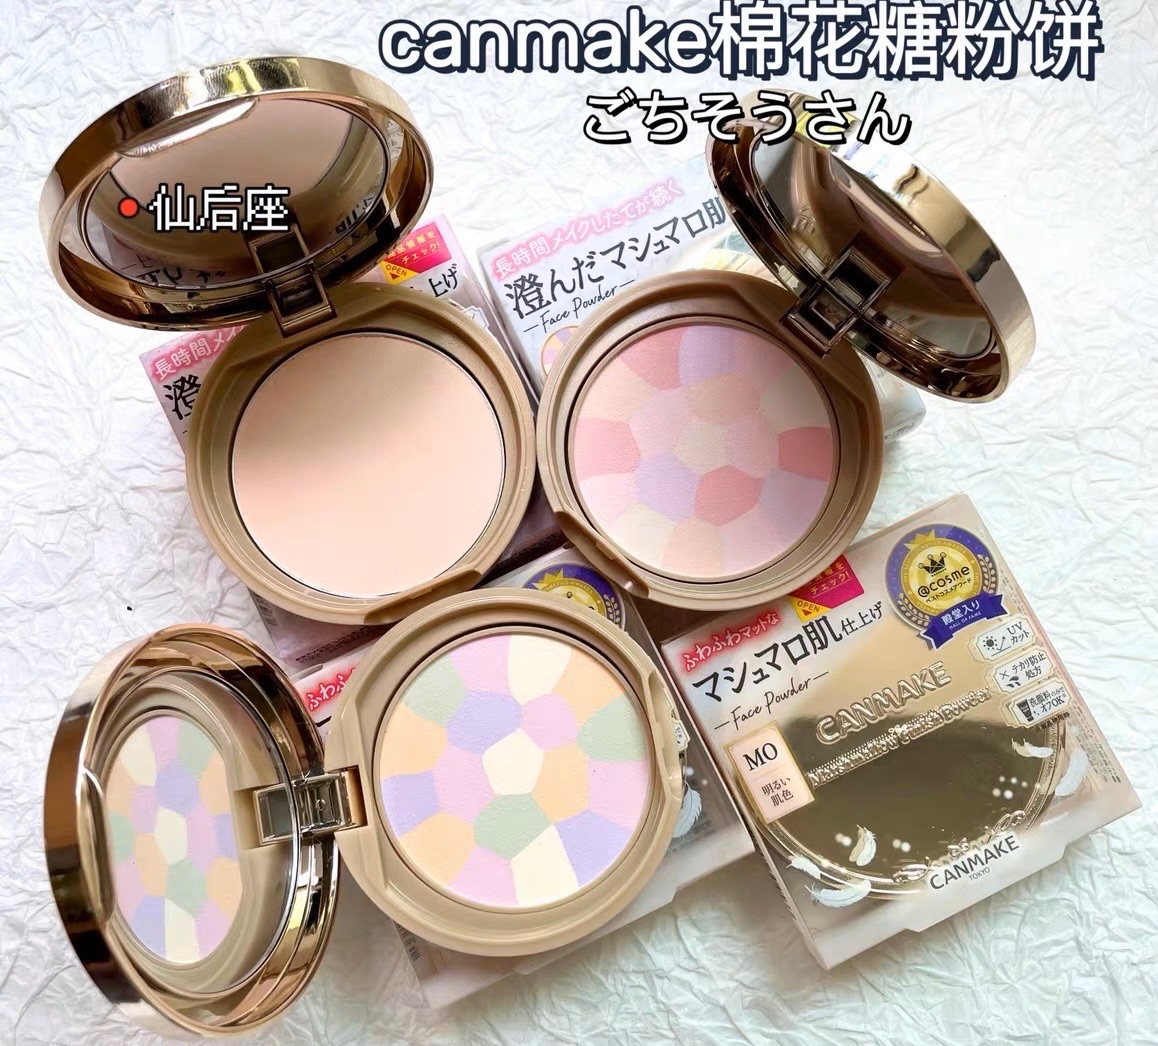 For the new version, you can check the Japanese CANMAKE minefield marshmallow powder, oil control, fixed makeup, matte e cake 03